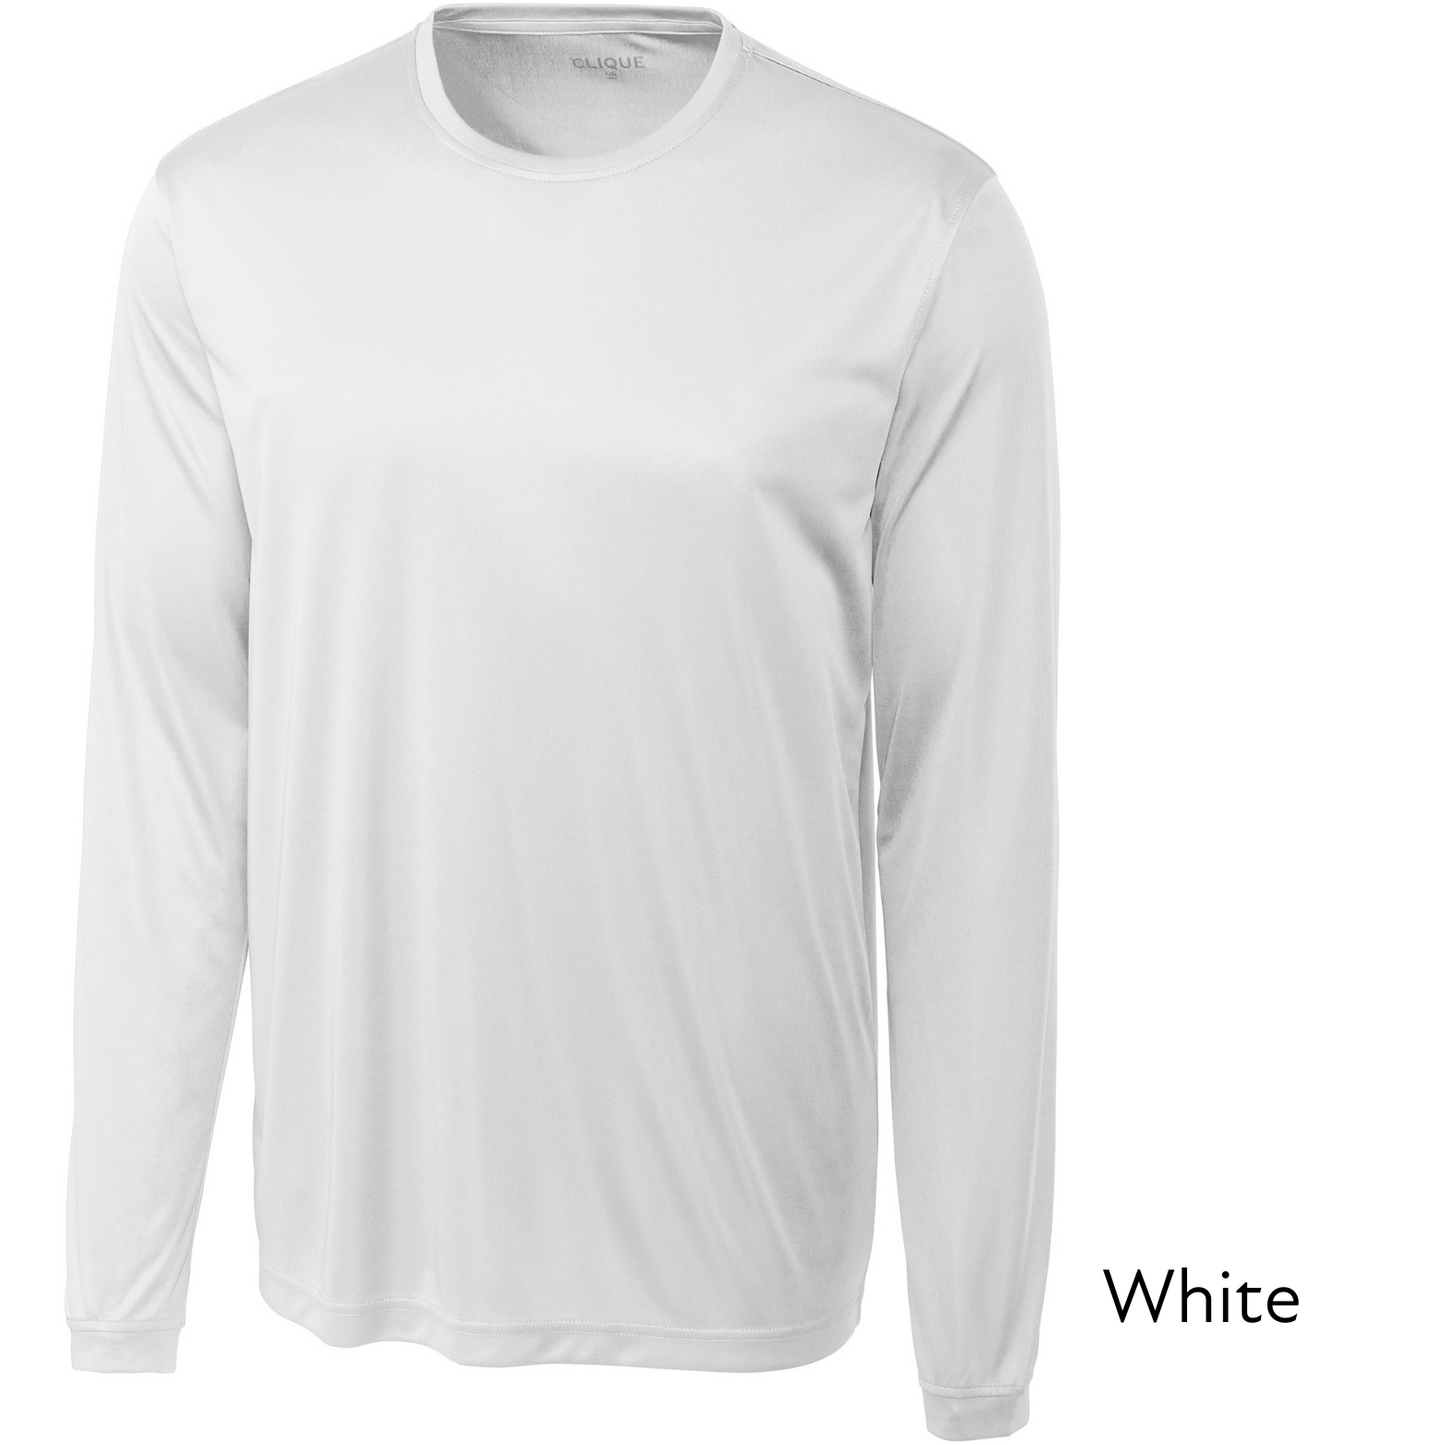 (Catalogue hommes/sport) Longsleeve Clique Spin Eco Performance